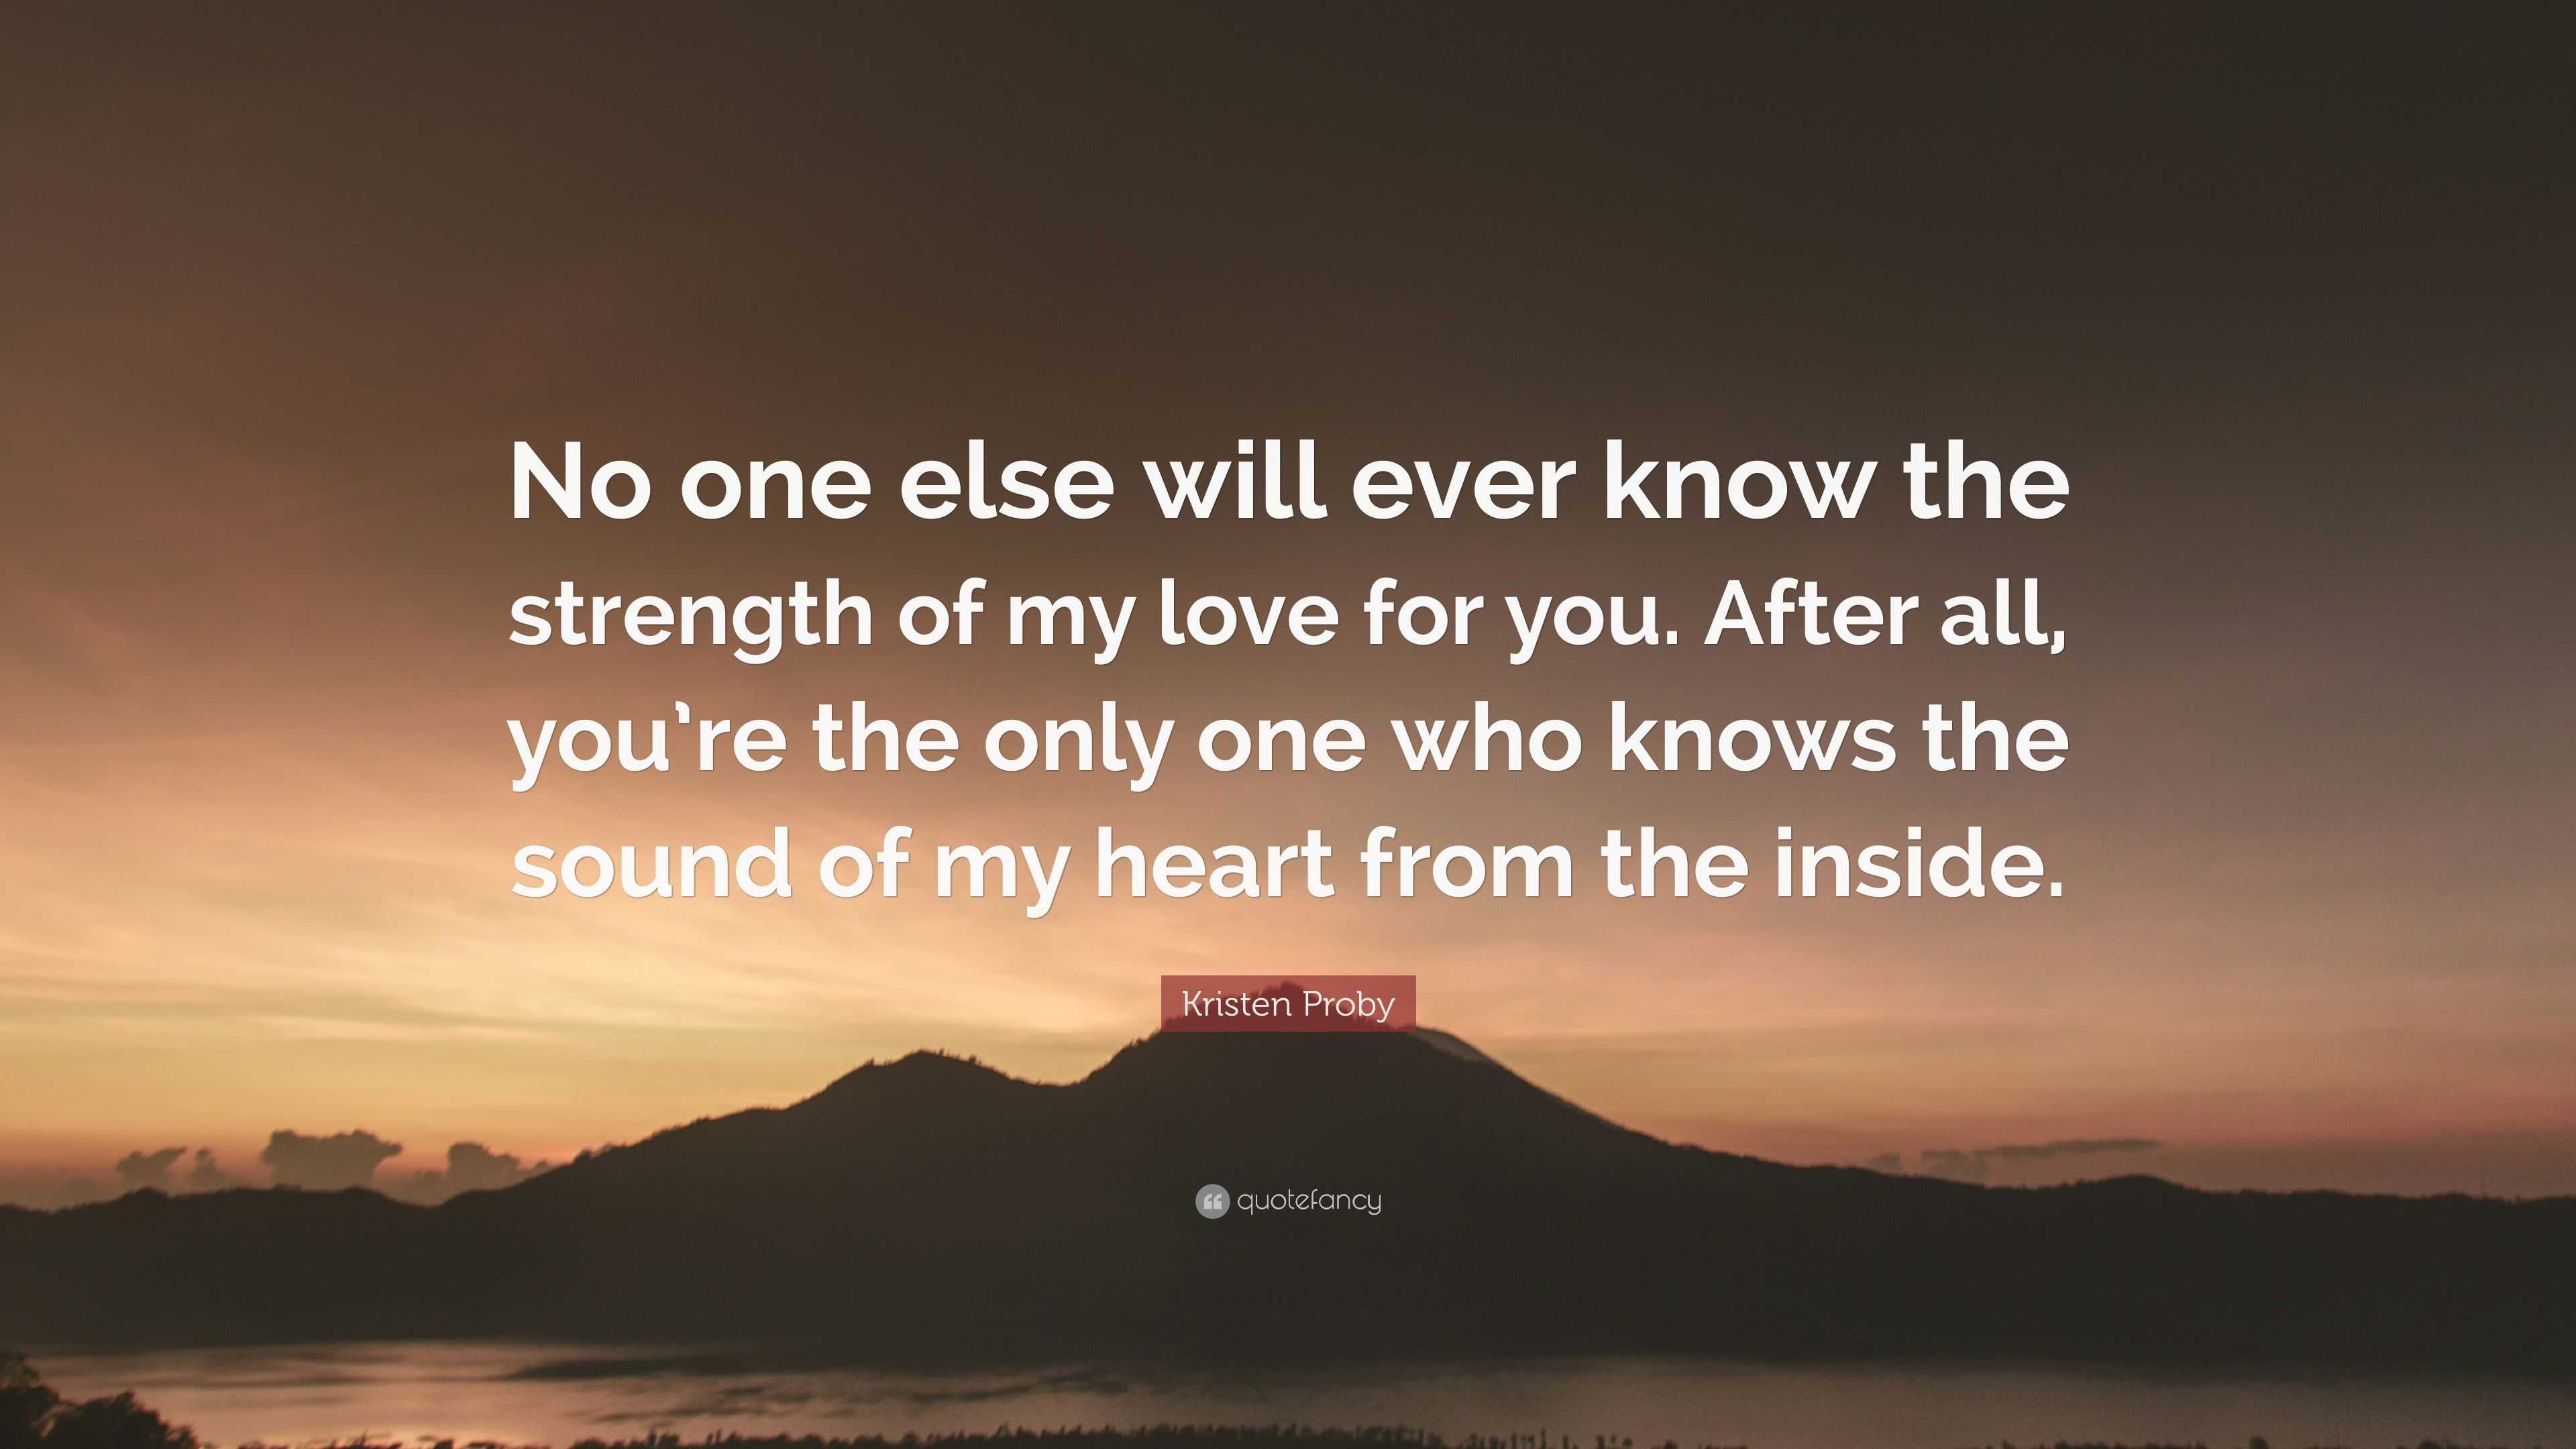 Kristen Proby Quote: “No one else will ever know the strength of my ...